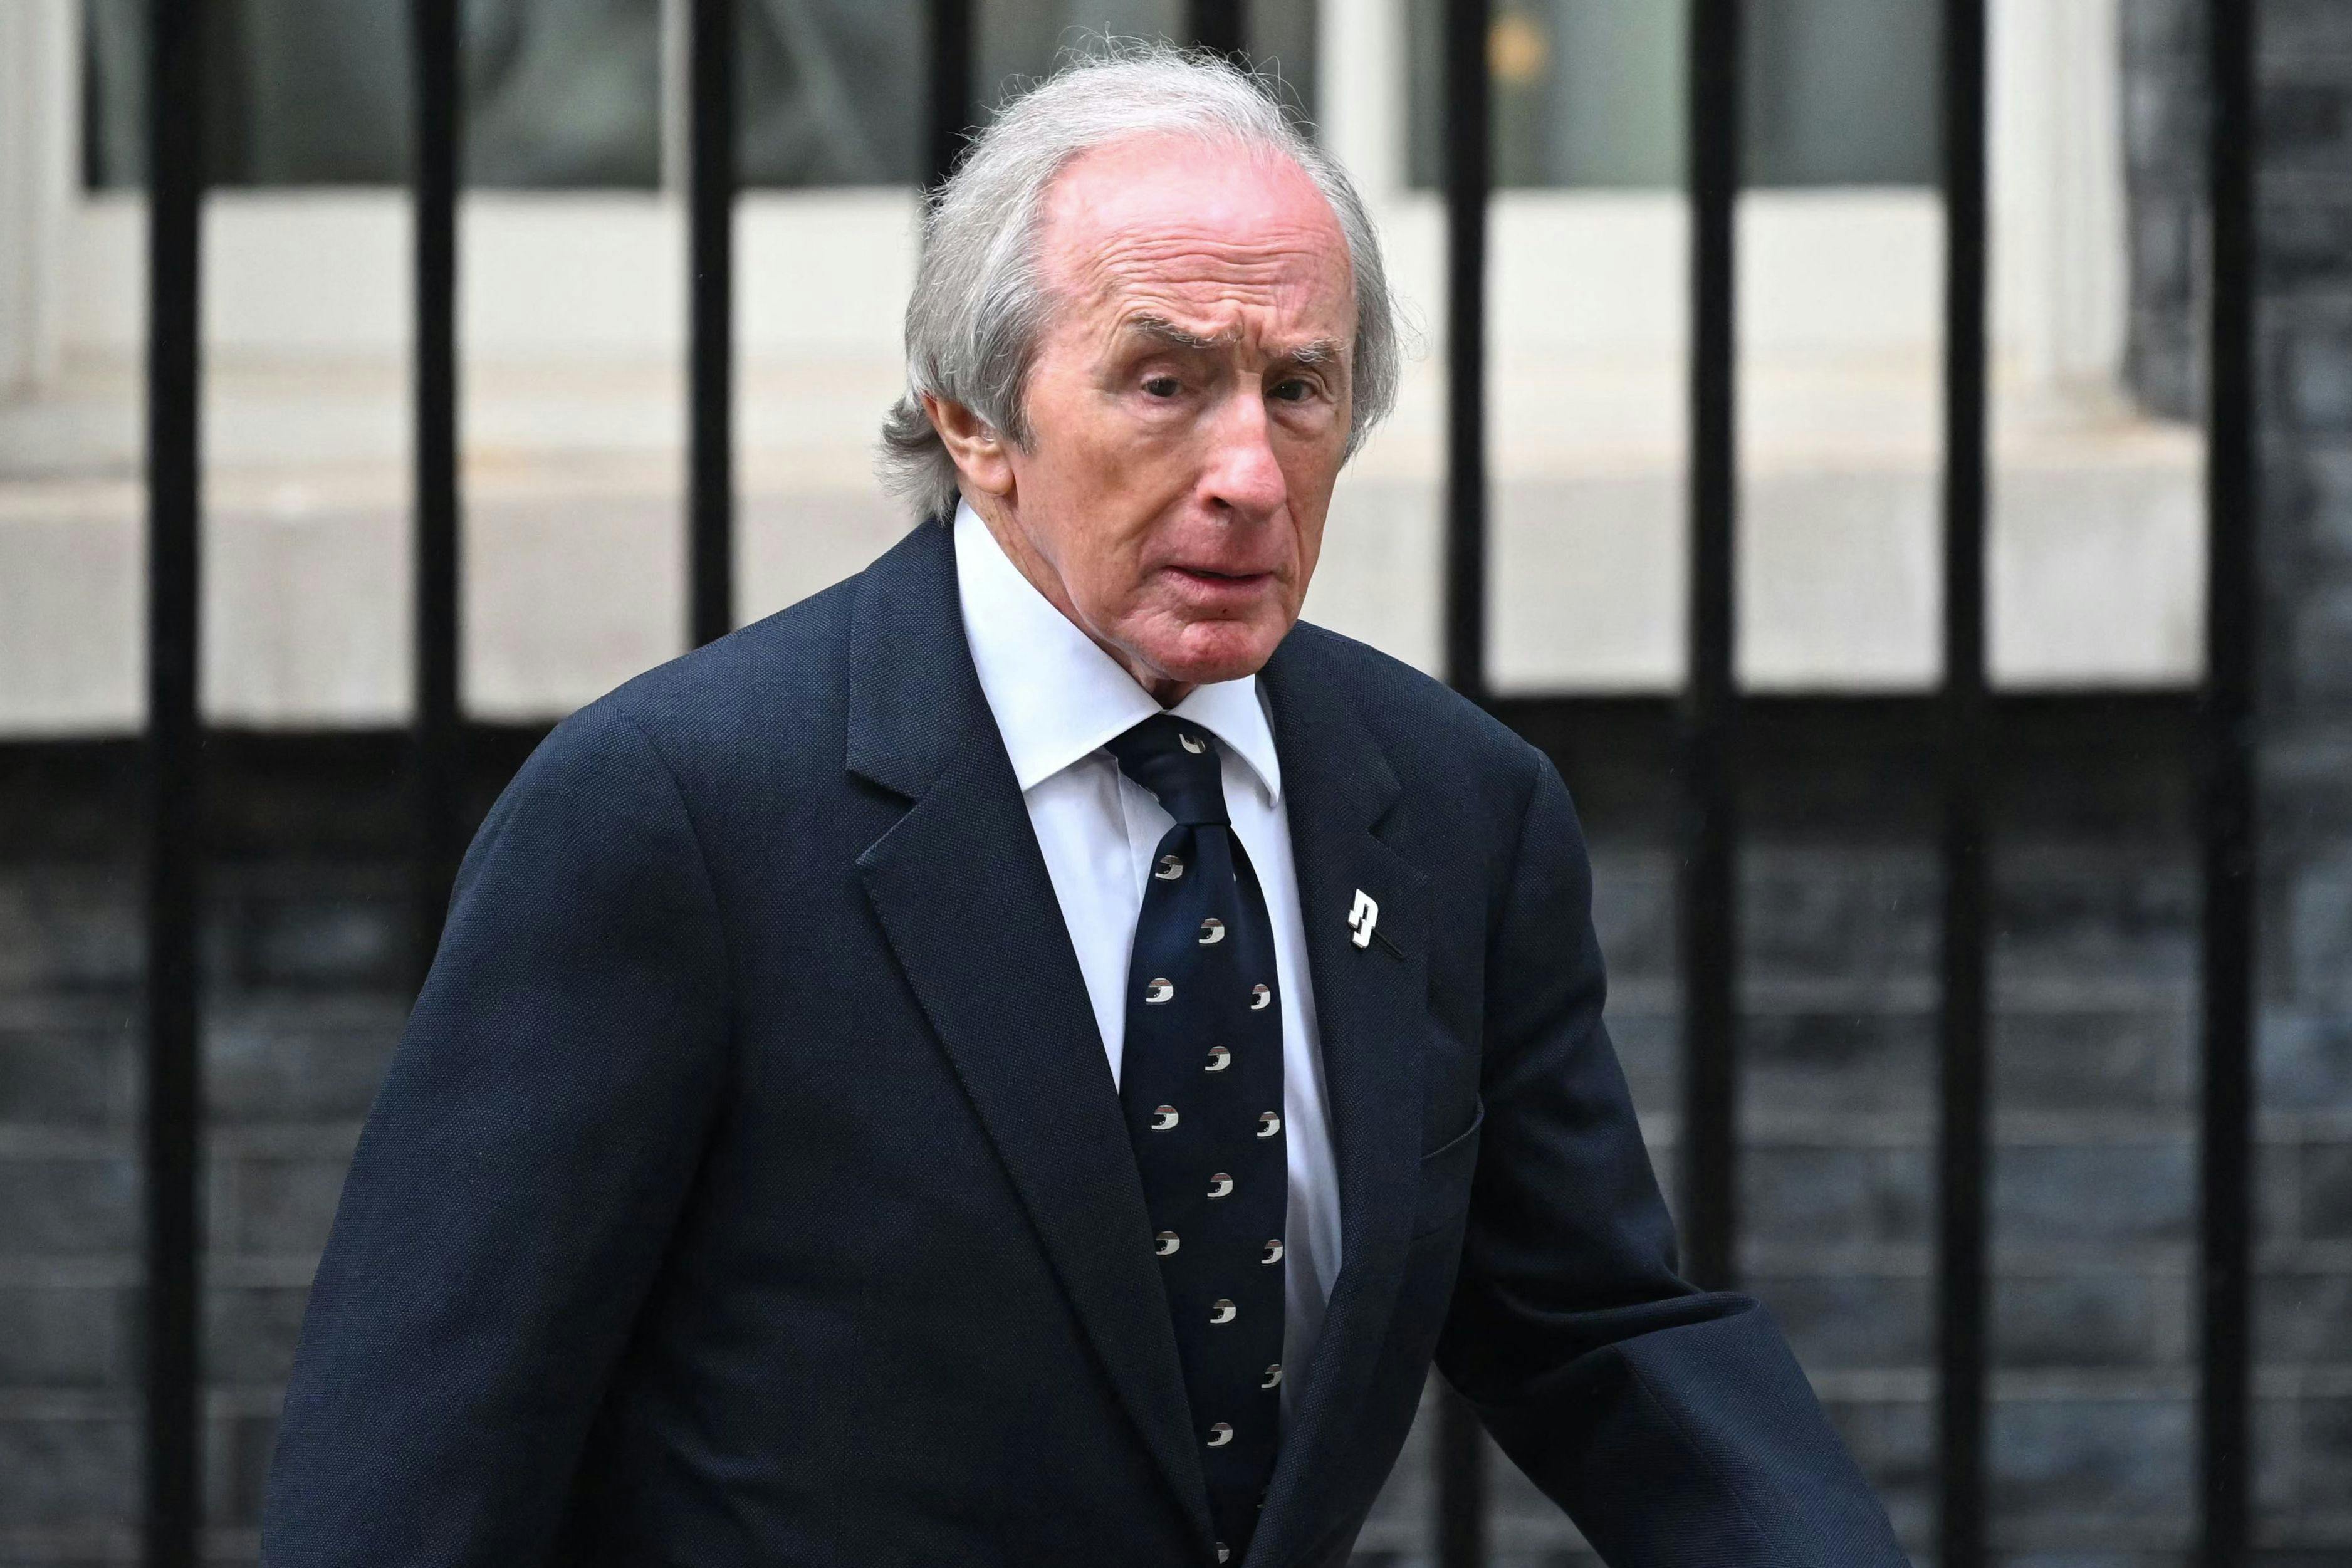 Former F1 driver Jackie Stewart arrives in Downing Street in London on July 4, 2023 ahead of the British Grand Prix. (Photo by JUSTIN TALLIS / AFP)